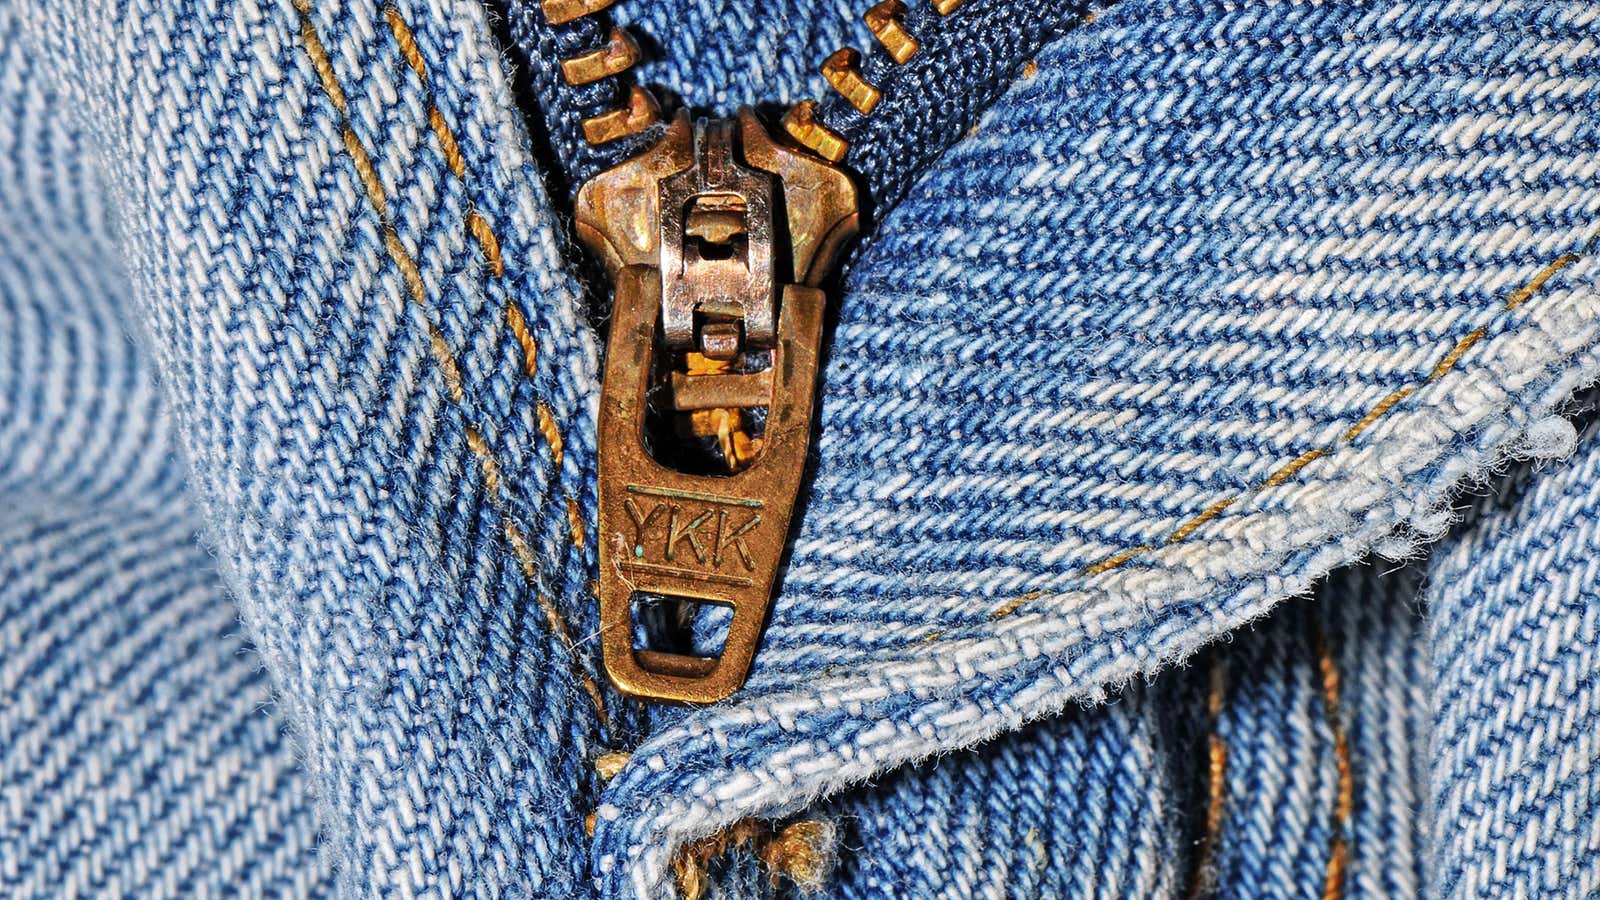 How to fix a zipper on jeans, replace the zip in a pair of jeans